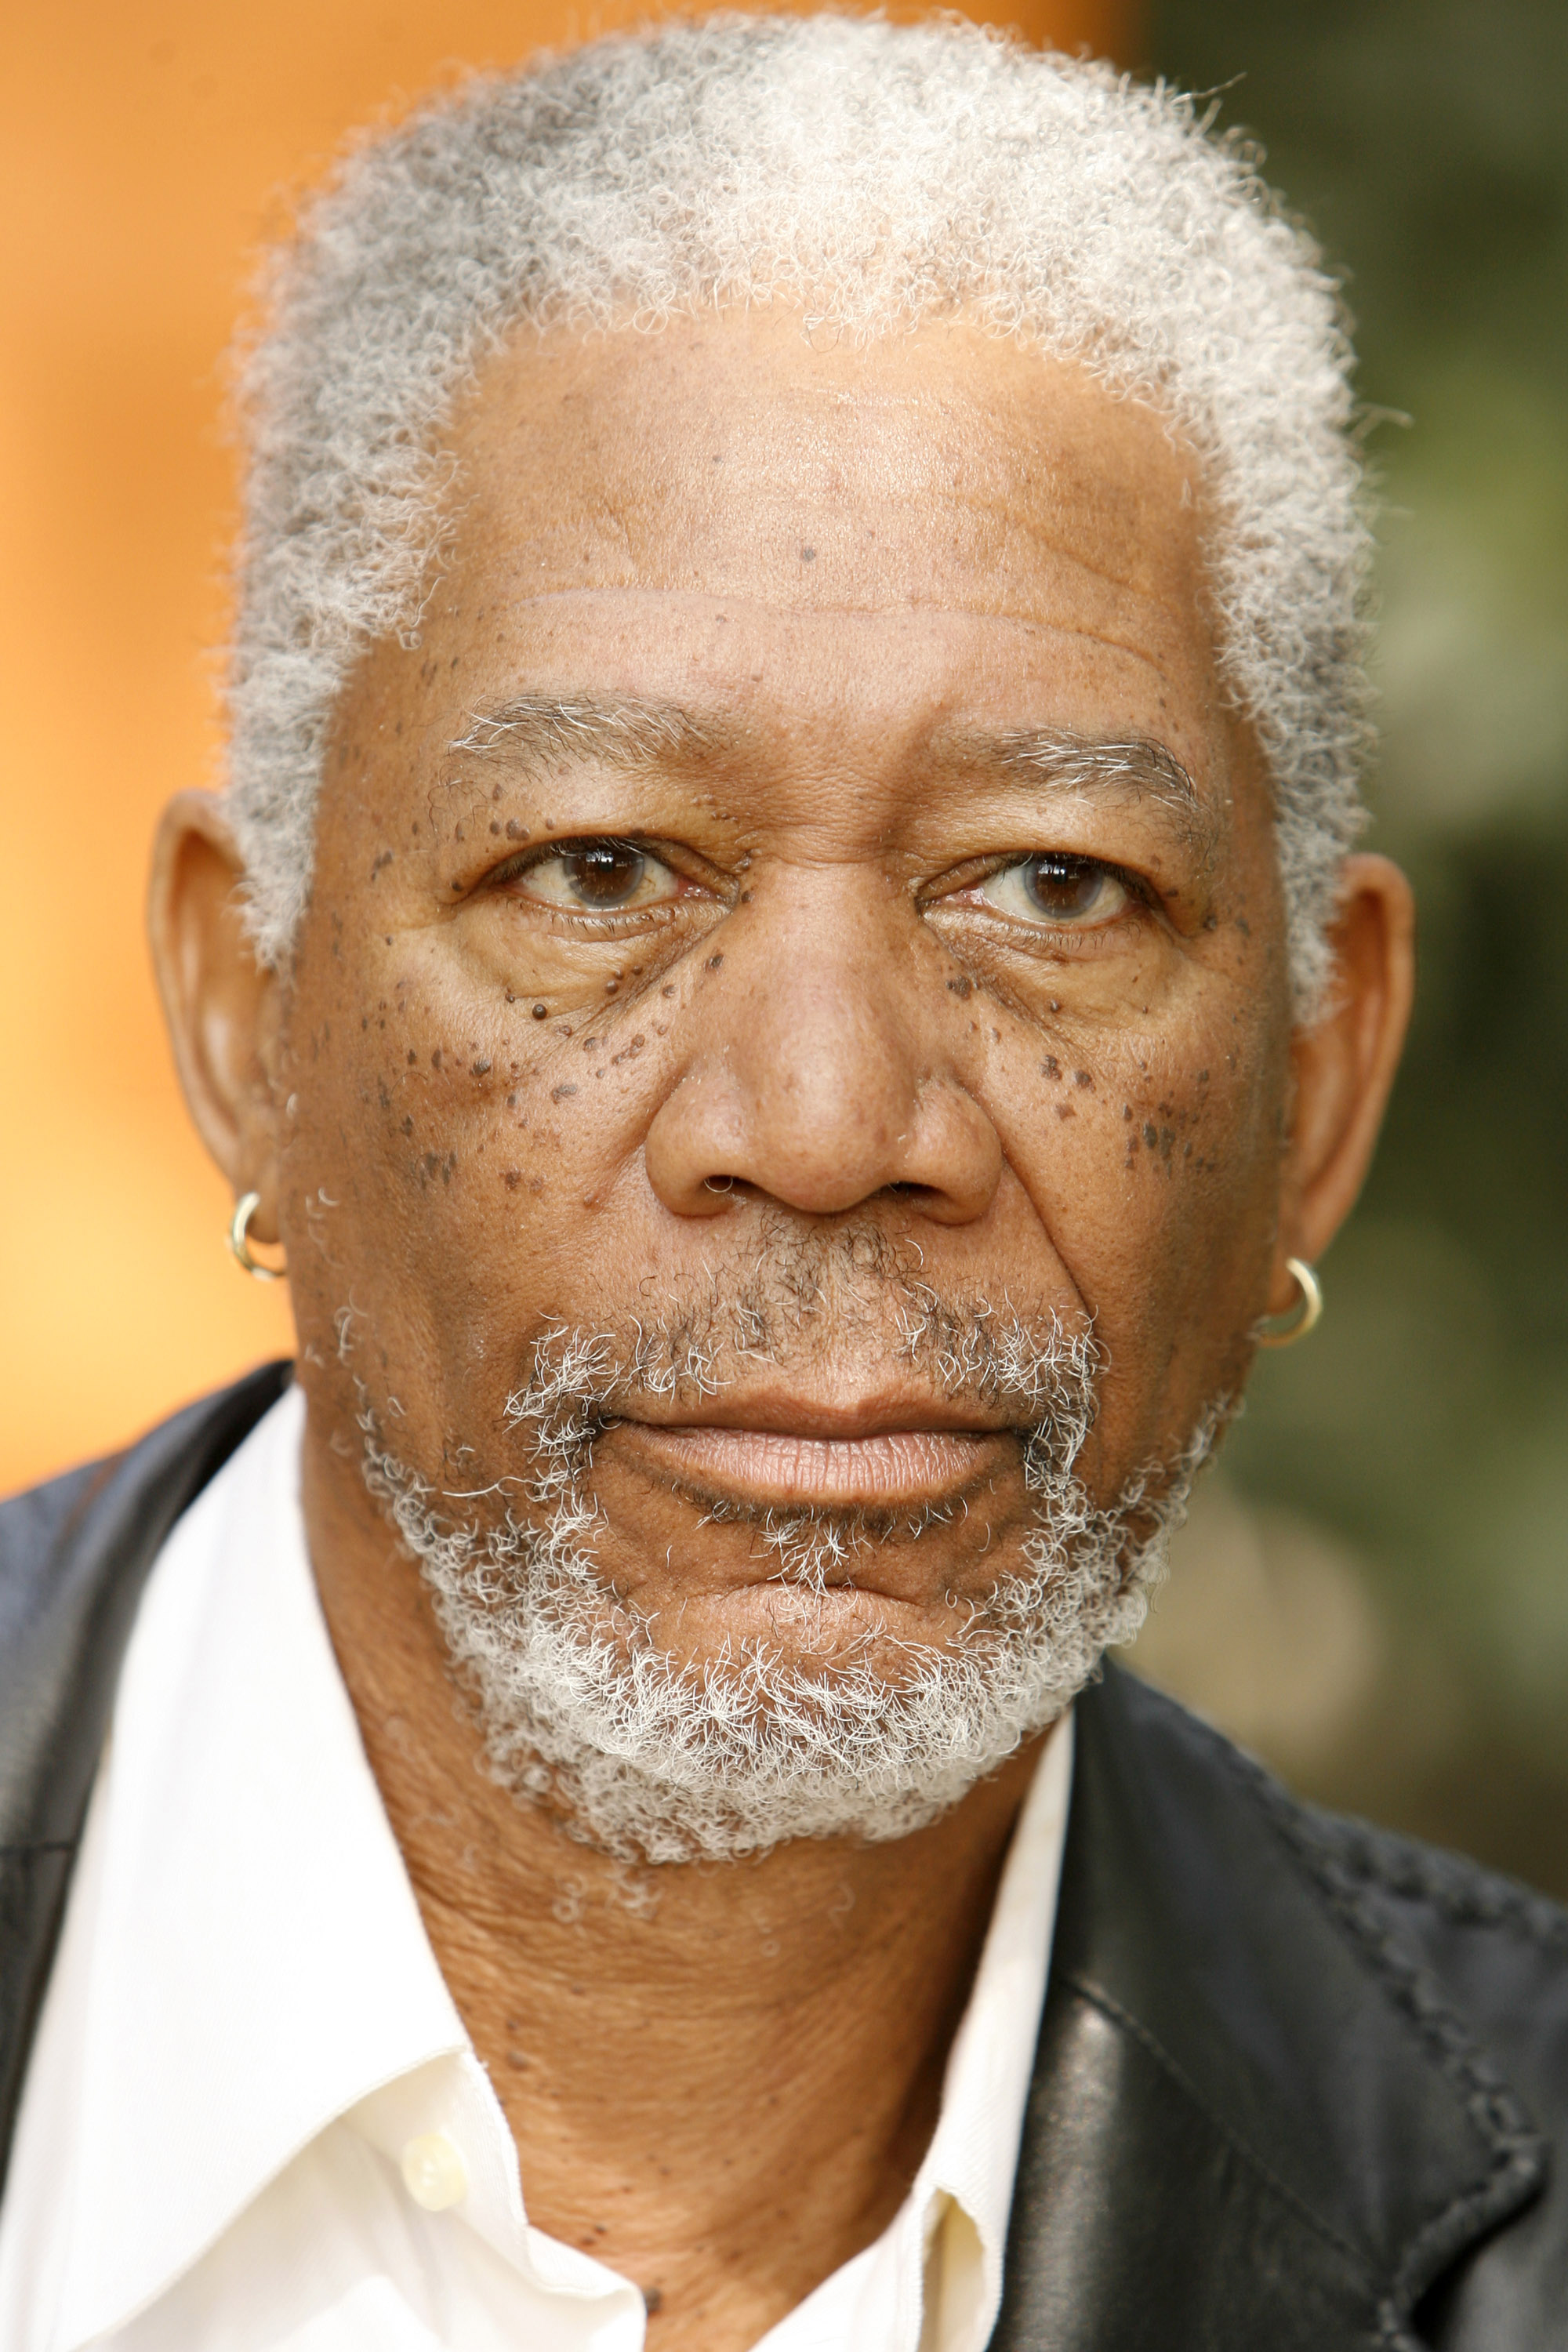 Morgan Freeman at a photoshoot for "Show Circuit" in 2006 | Source: Getty Images